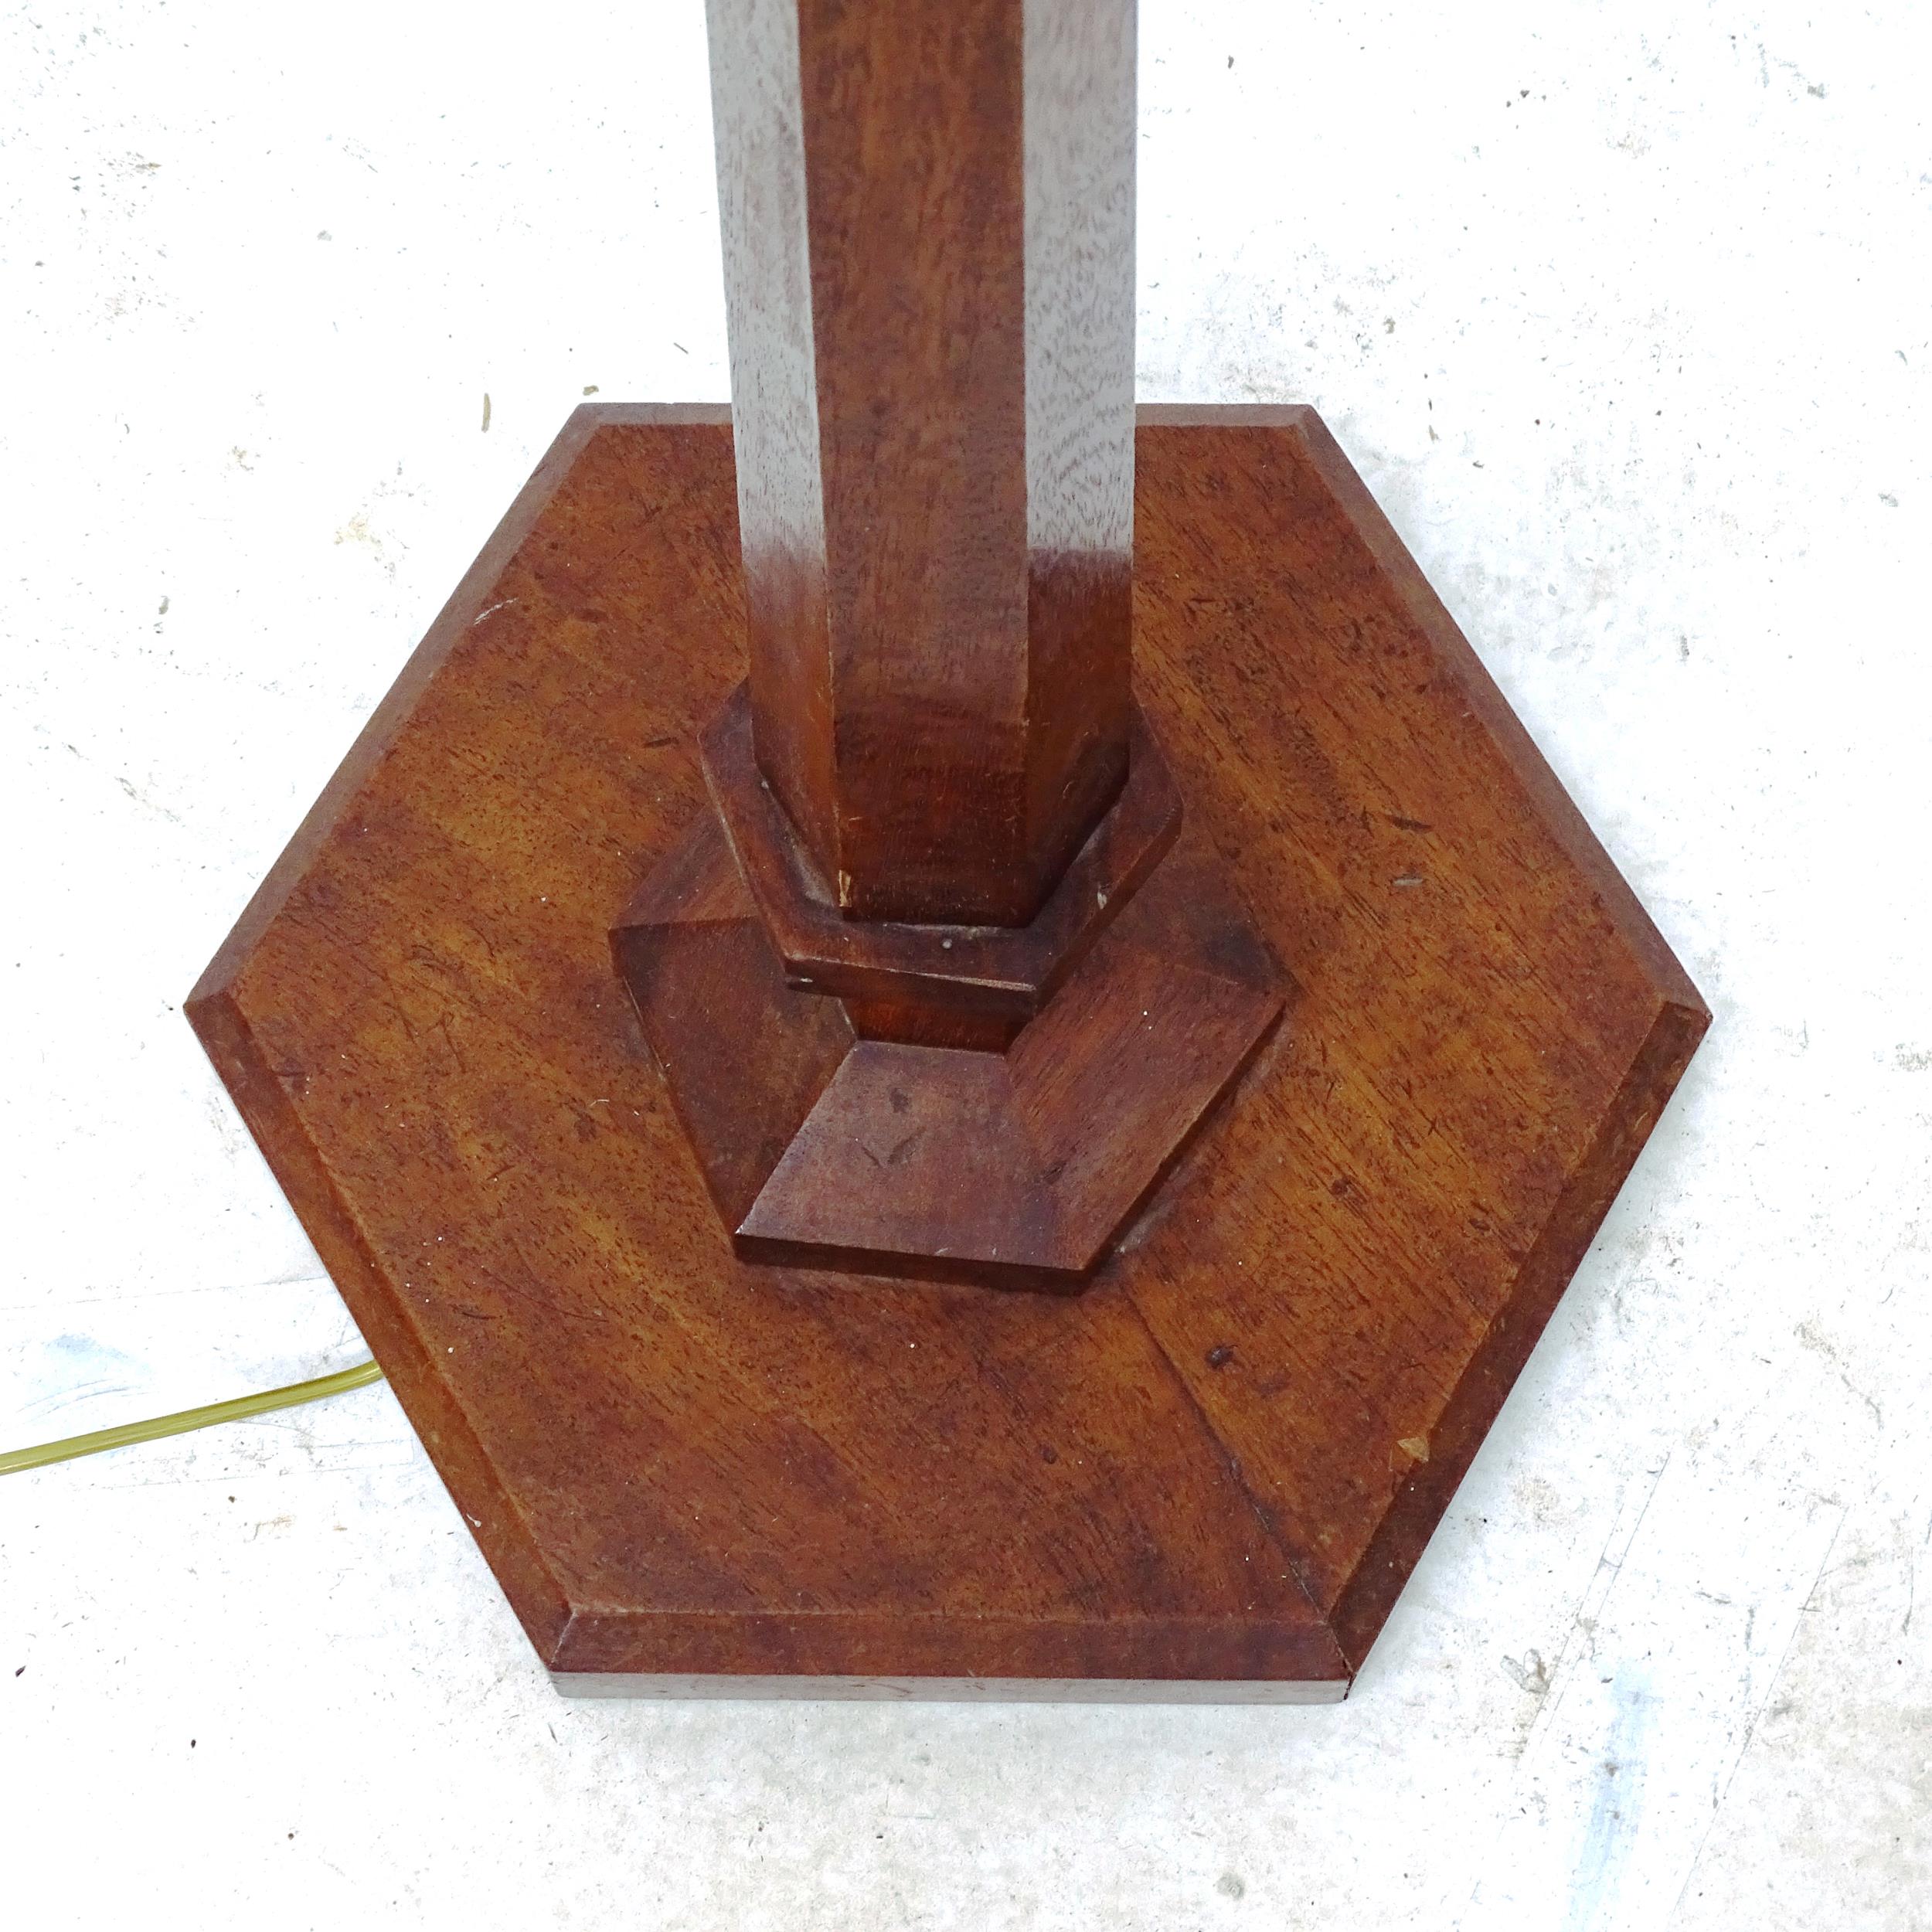 A 1920s Art Deco mahogany standard lamp, height to bayonet fitting 148cm - Image 2 of 2